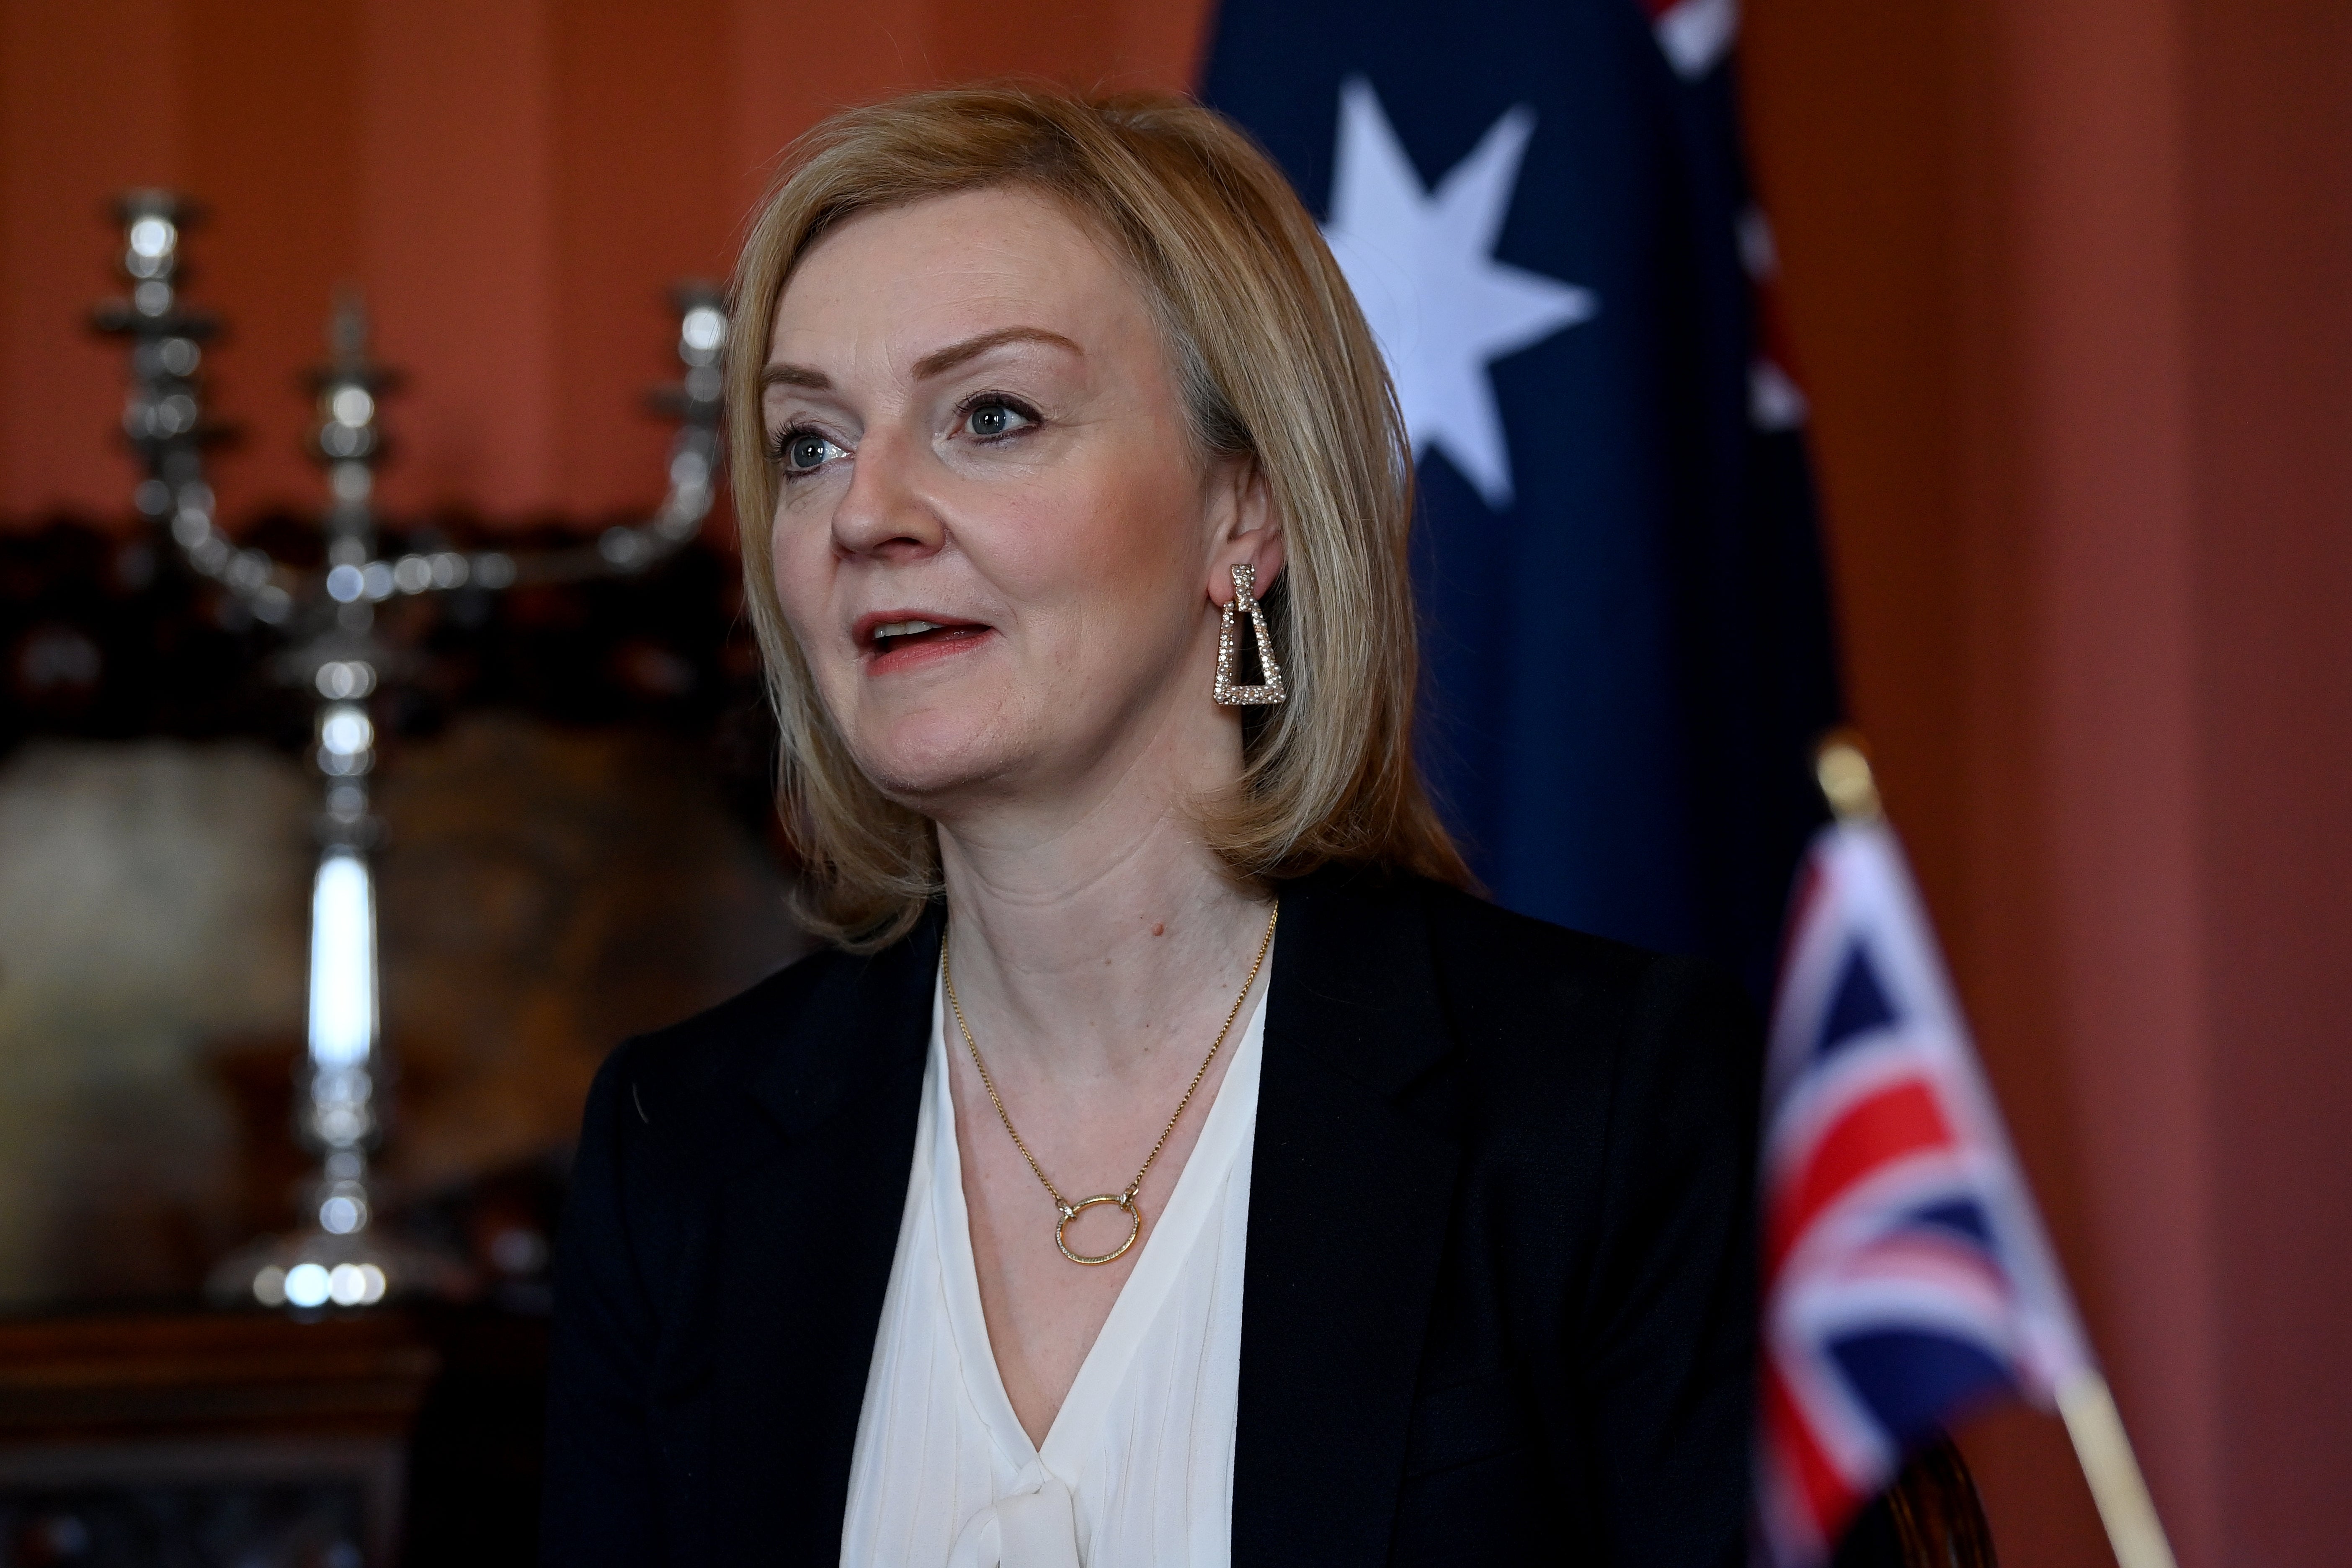 Truss was challenged on the scheme during her visit to Australia to promote trade and defence links with the UK